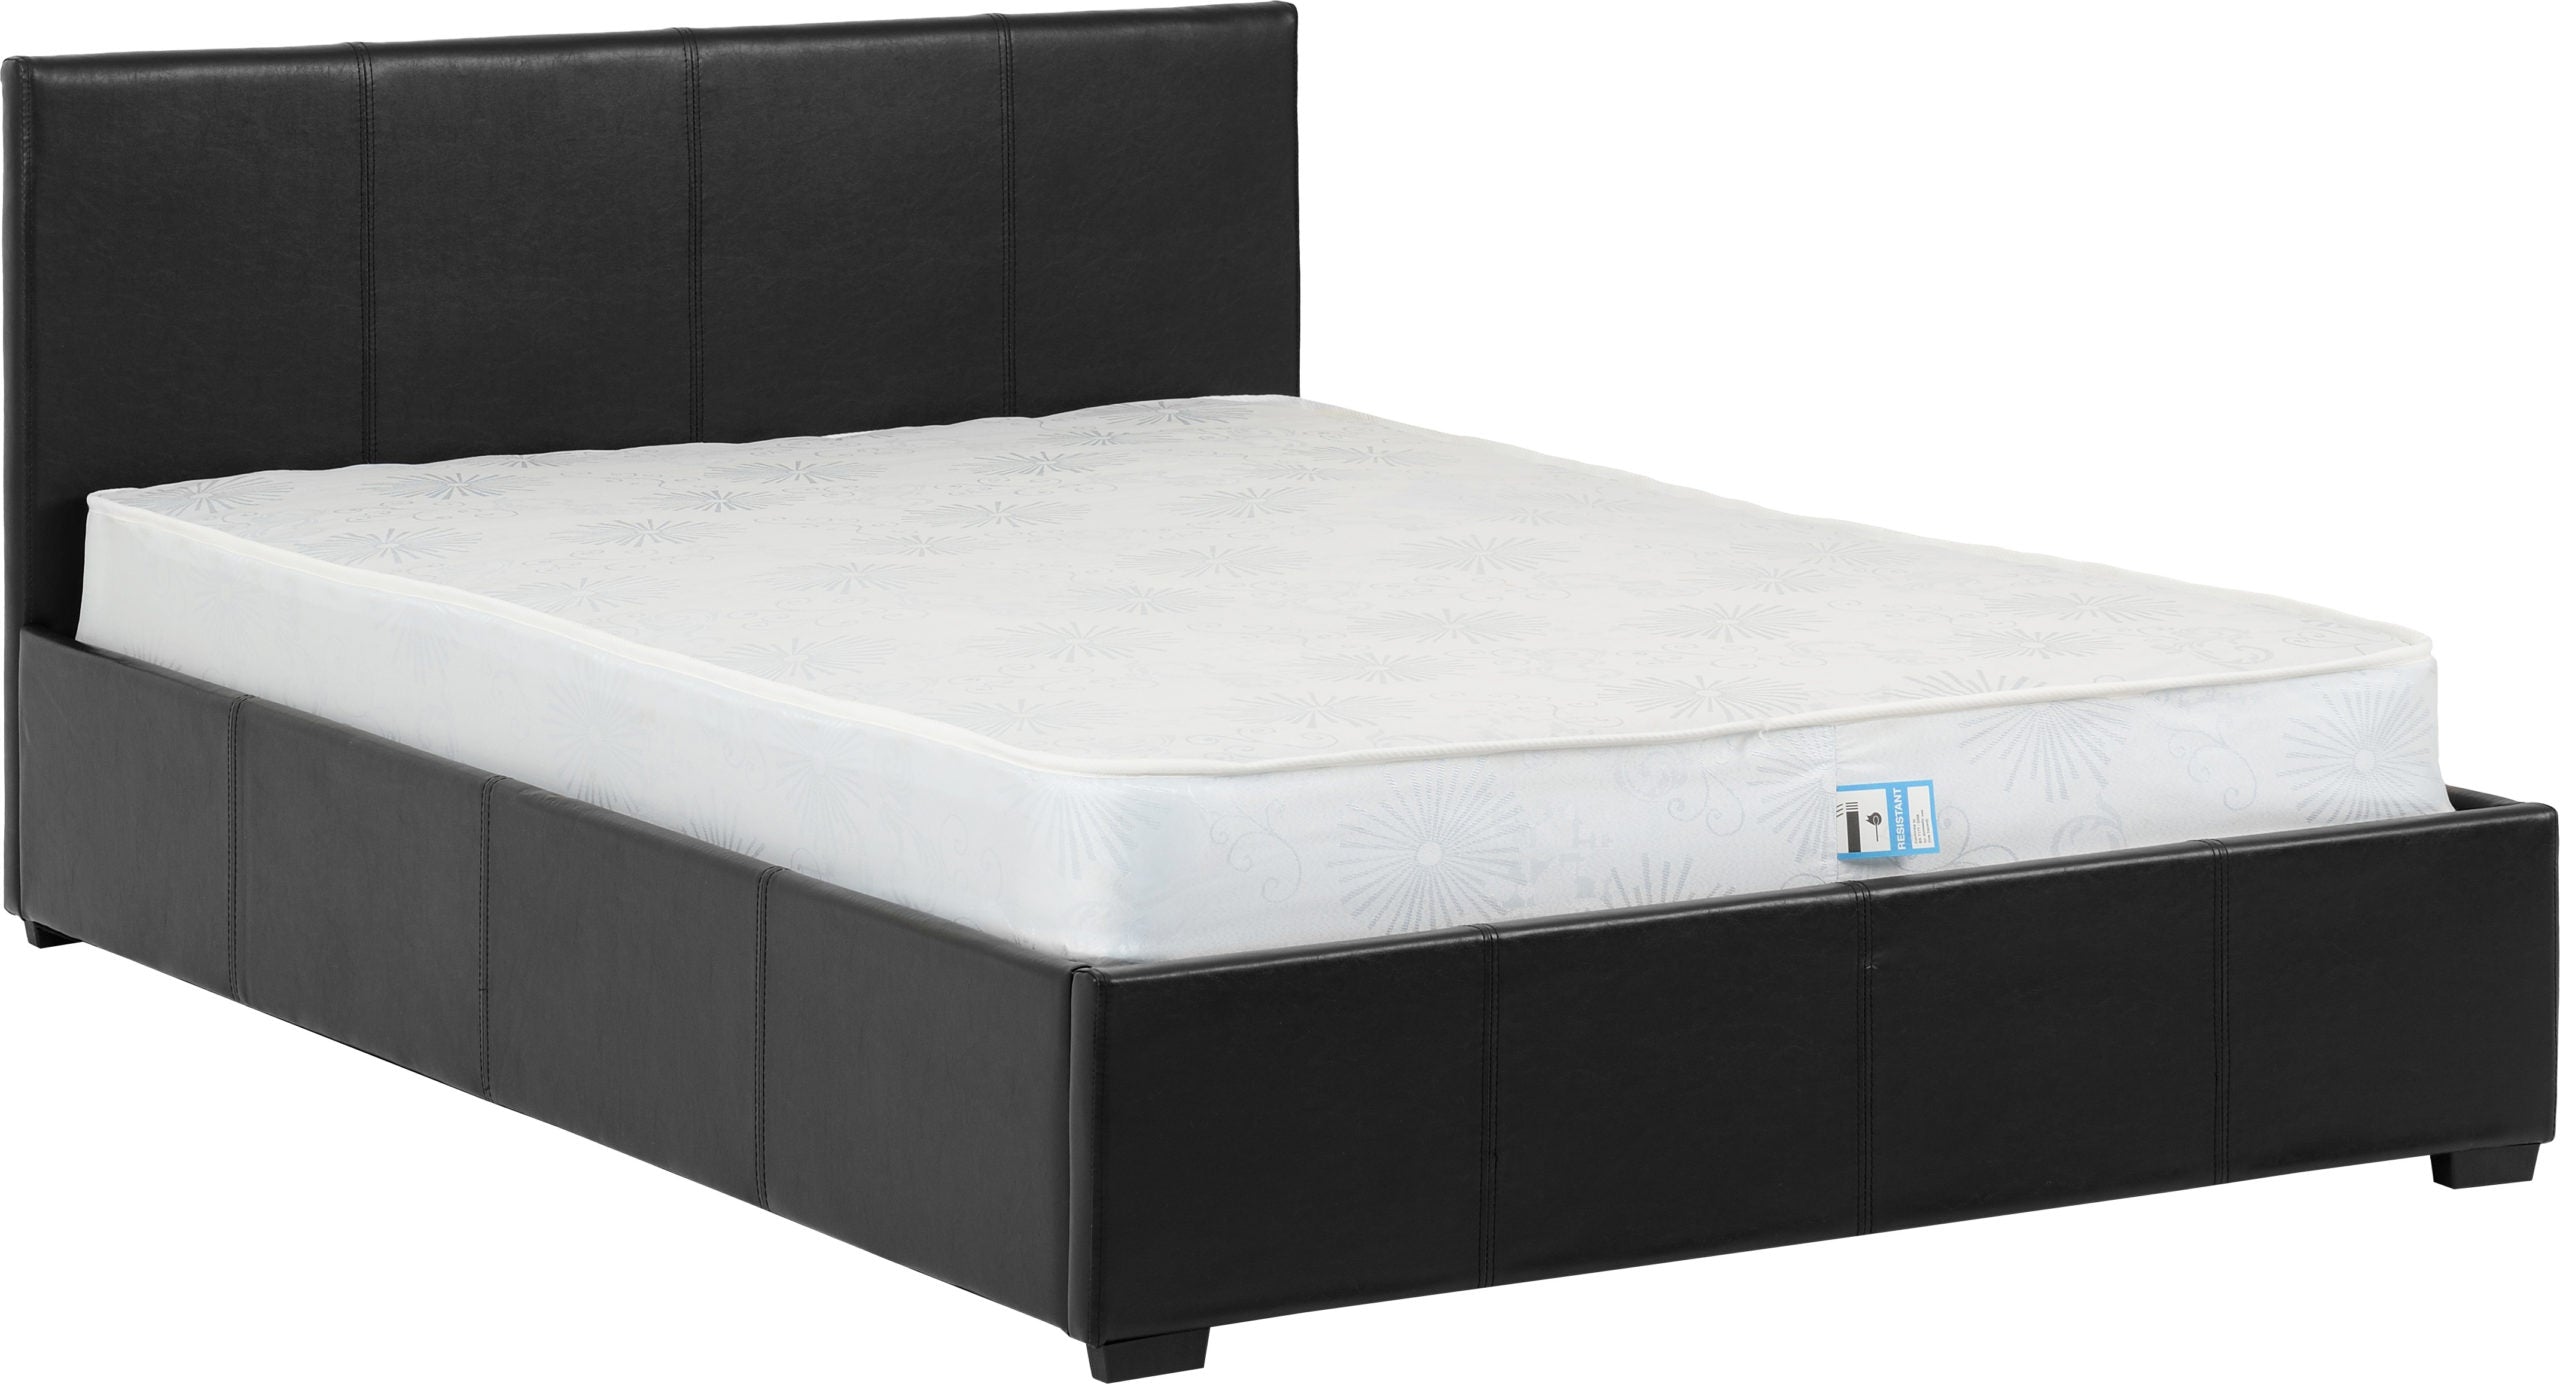 Waverley 4ft Gas Lift Storage Bed Frame in Black Faux Leather